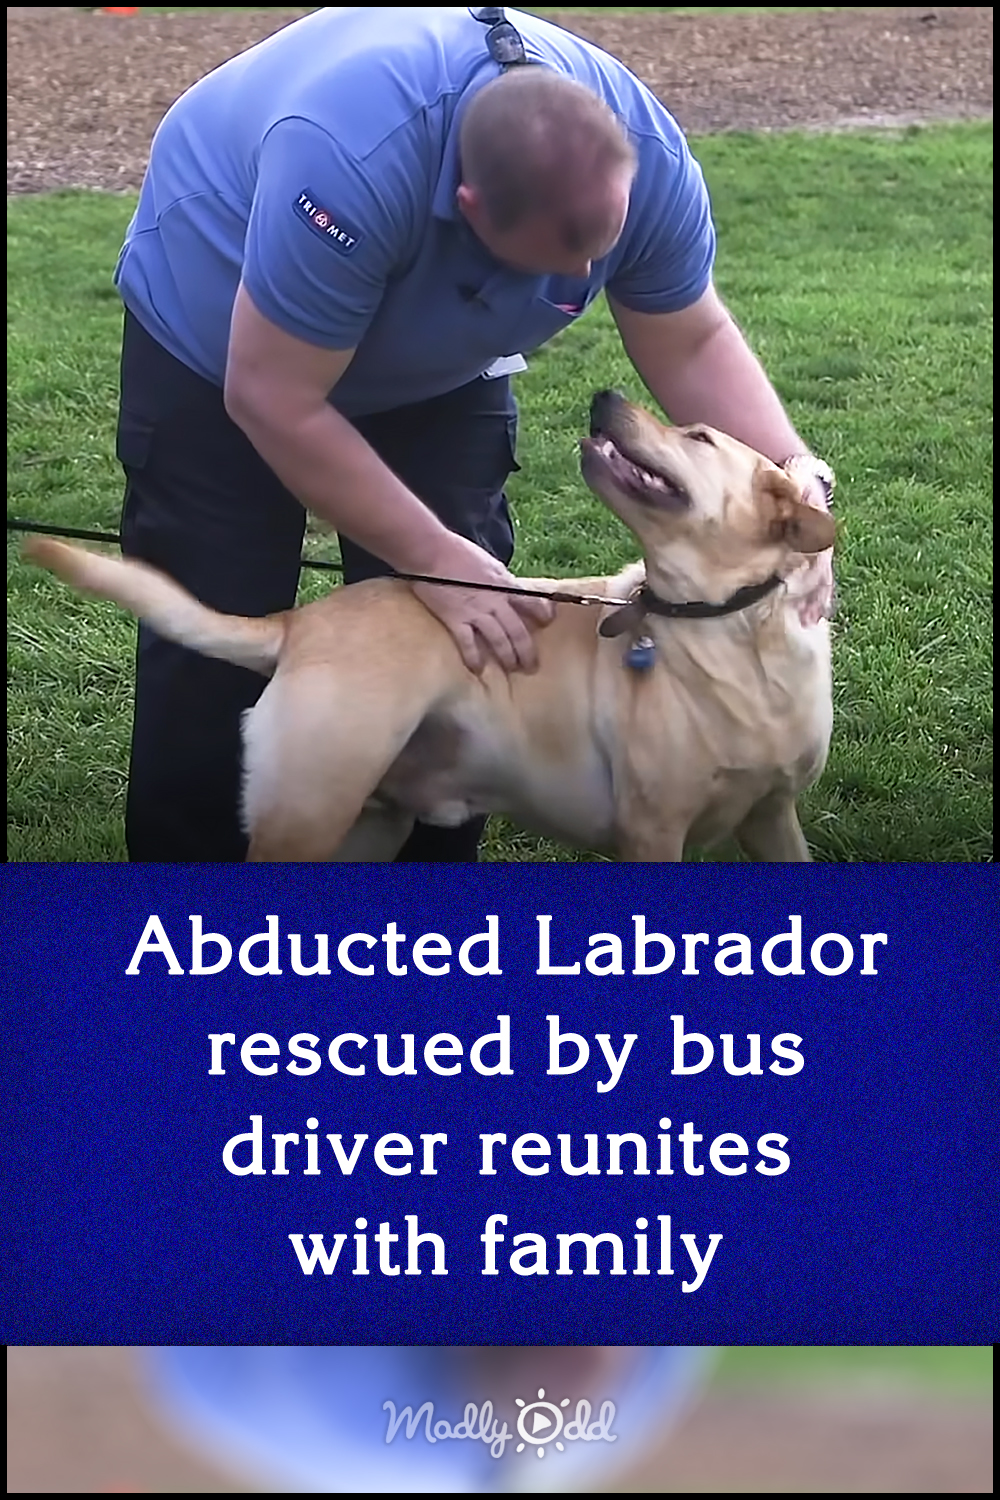 Abducted Labrador rescued by bus driver reunites with family